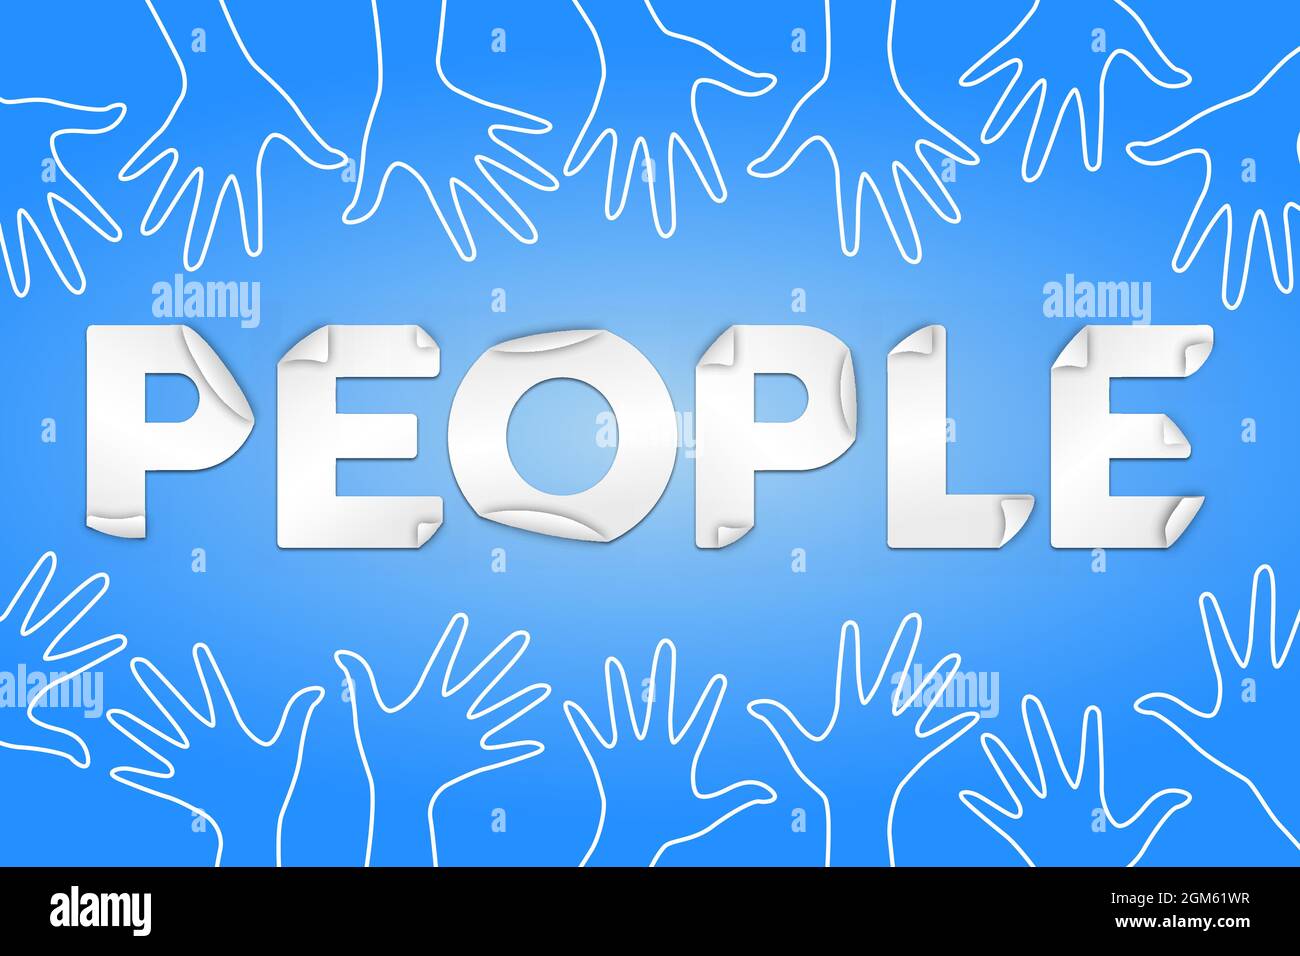 People text quote typography sign with hands raised up together. Diverse cartoon team illustration for business or community equality. Stock Vector